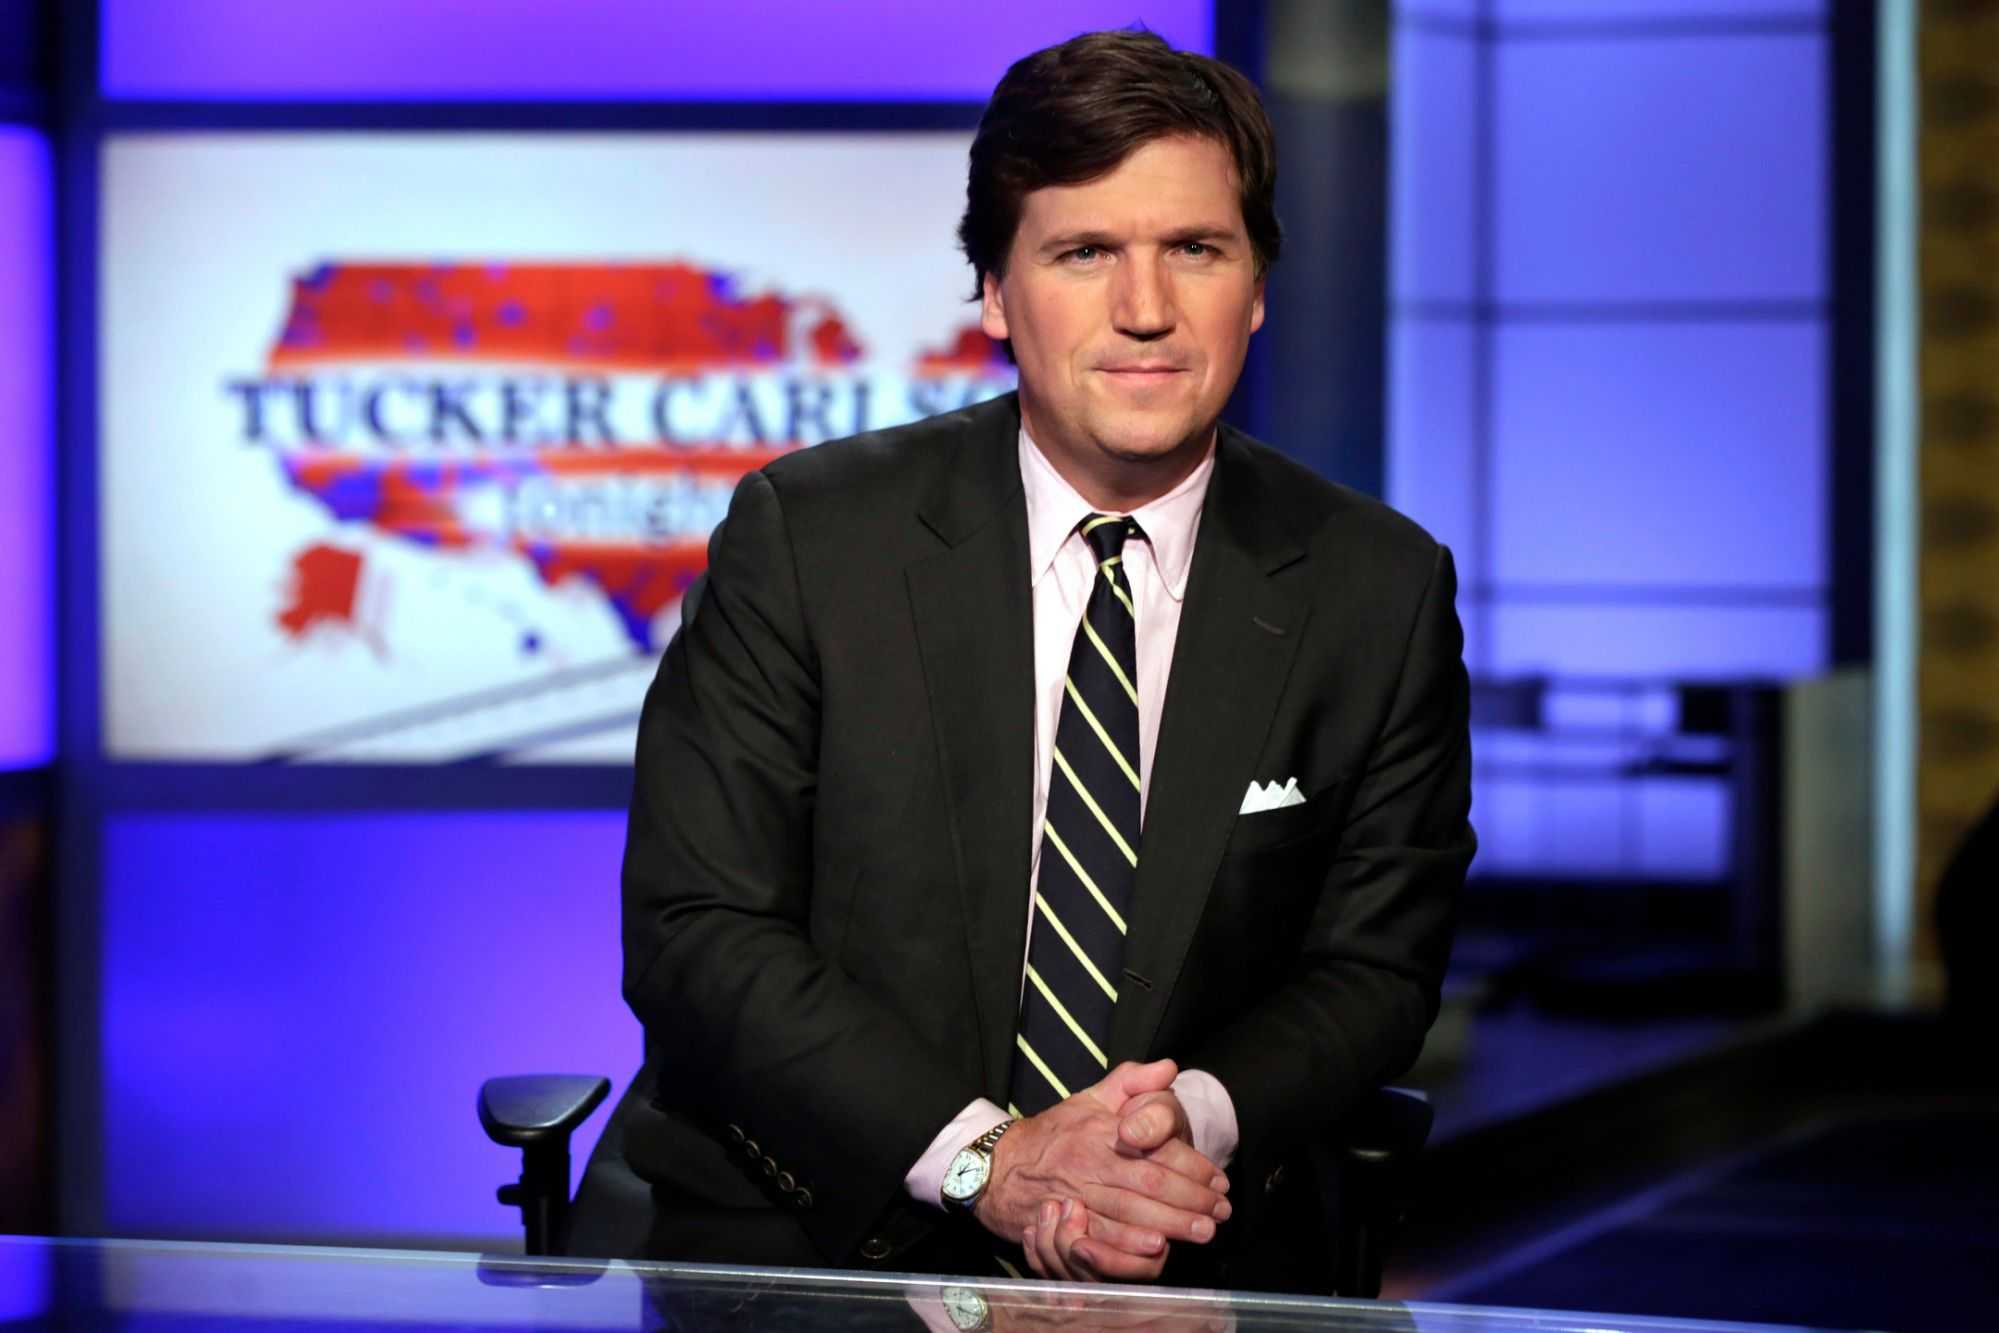 Tucker Carlson gives 'update' after segment on Sidney Powell, voter fraud draws backlash